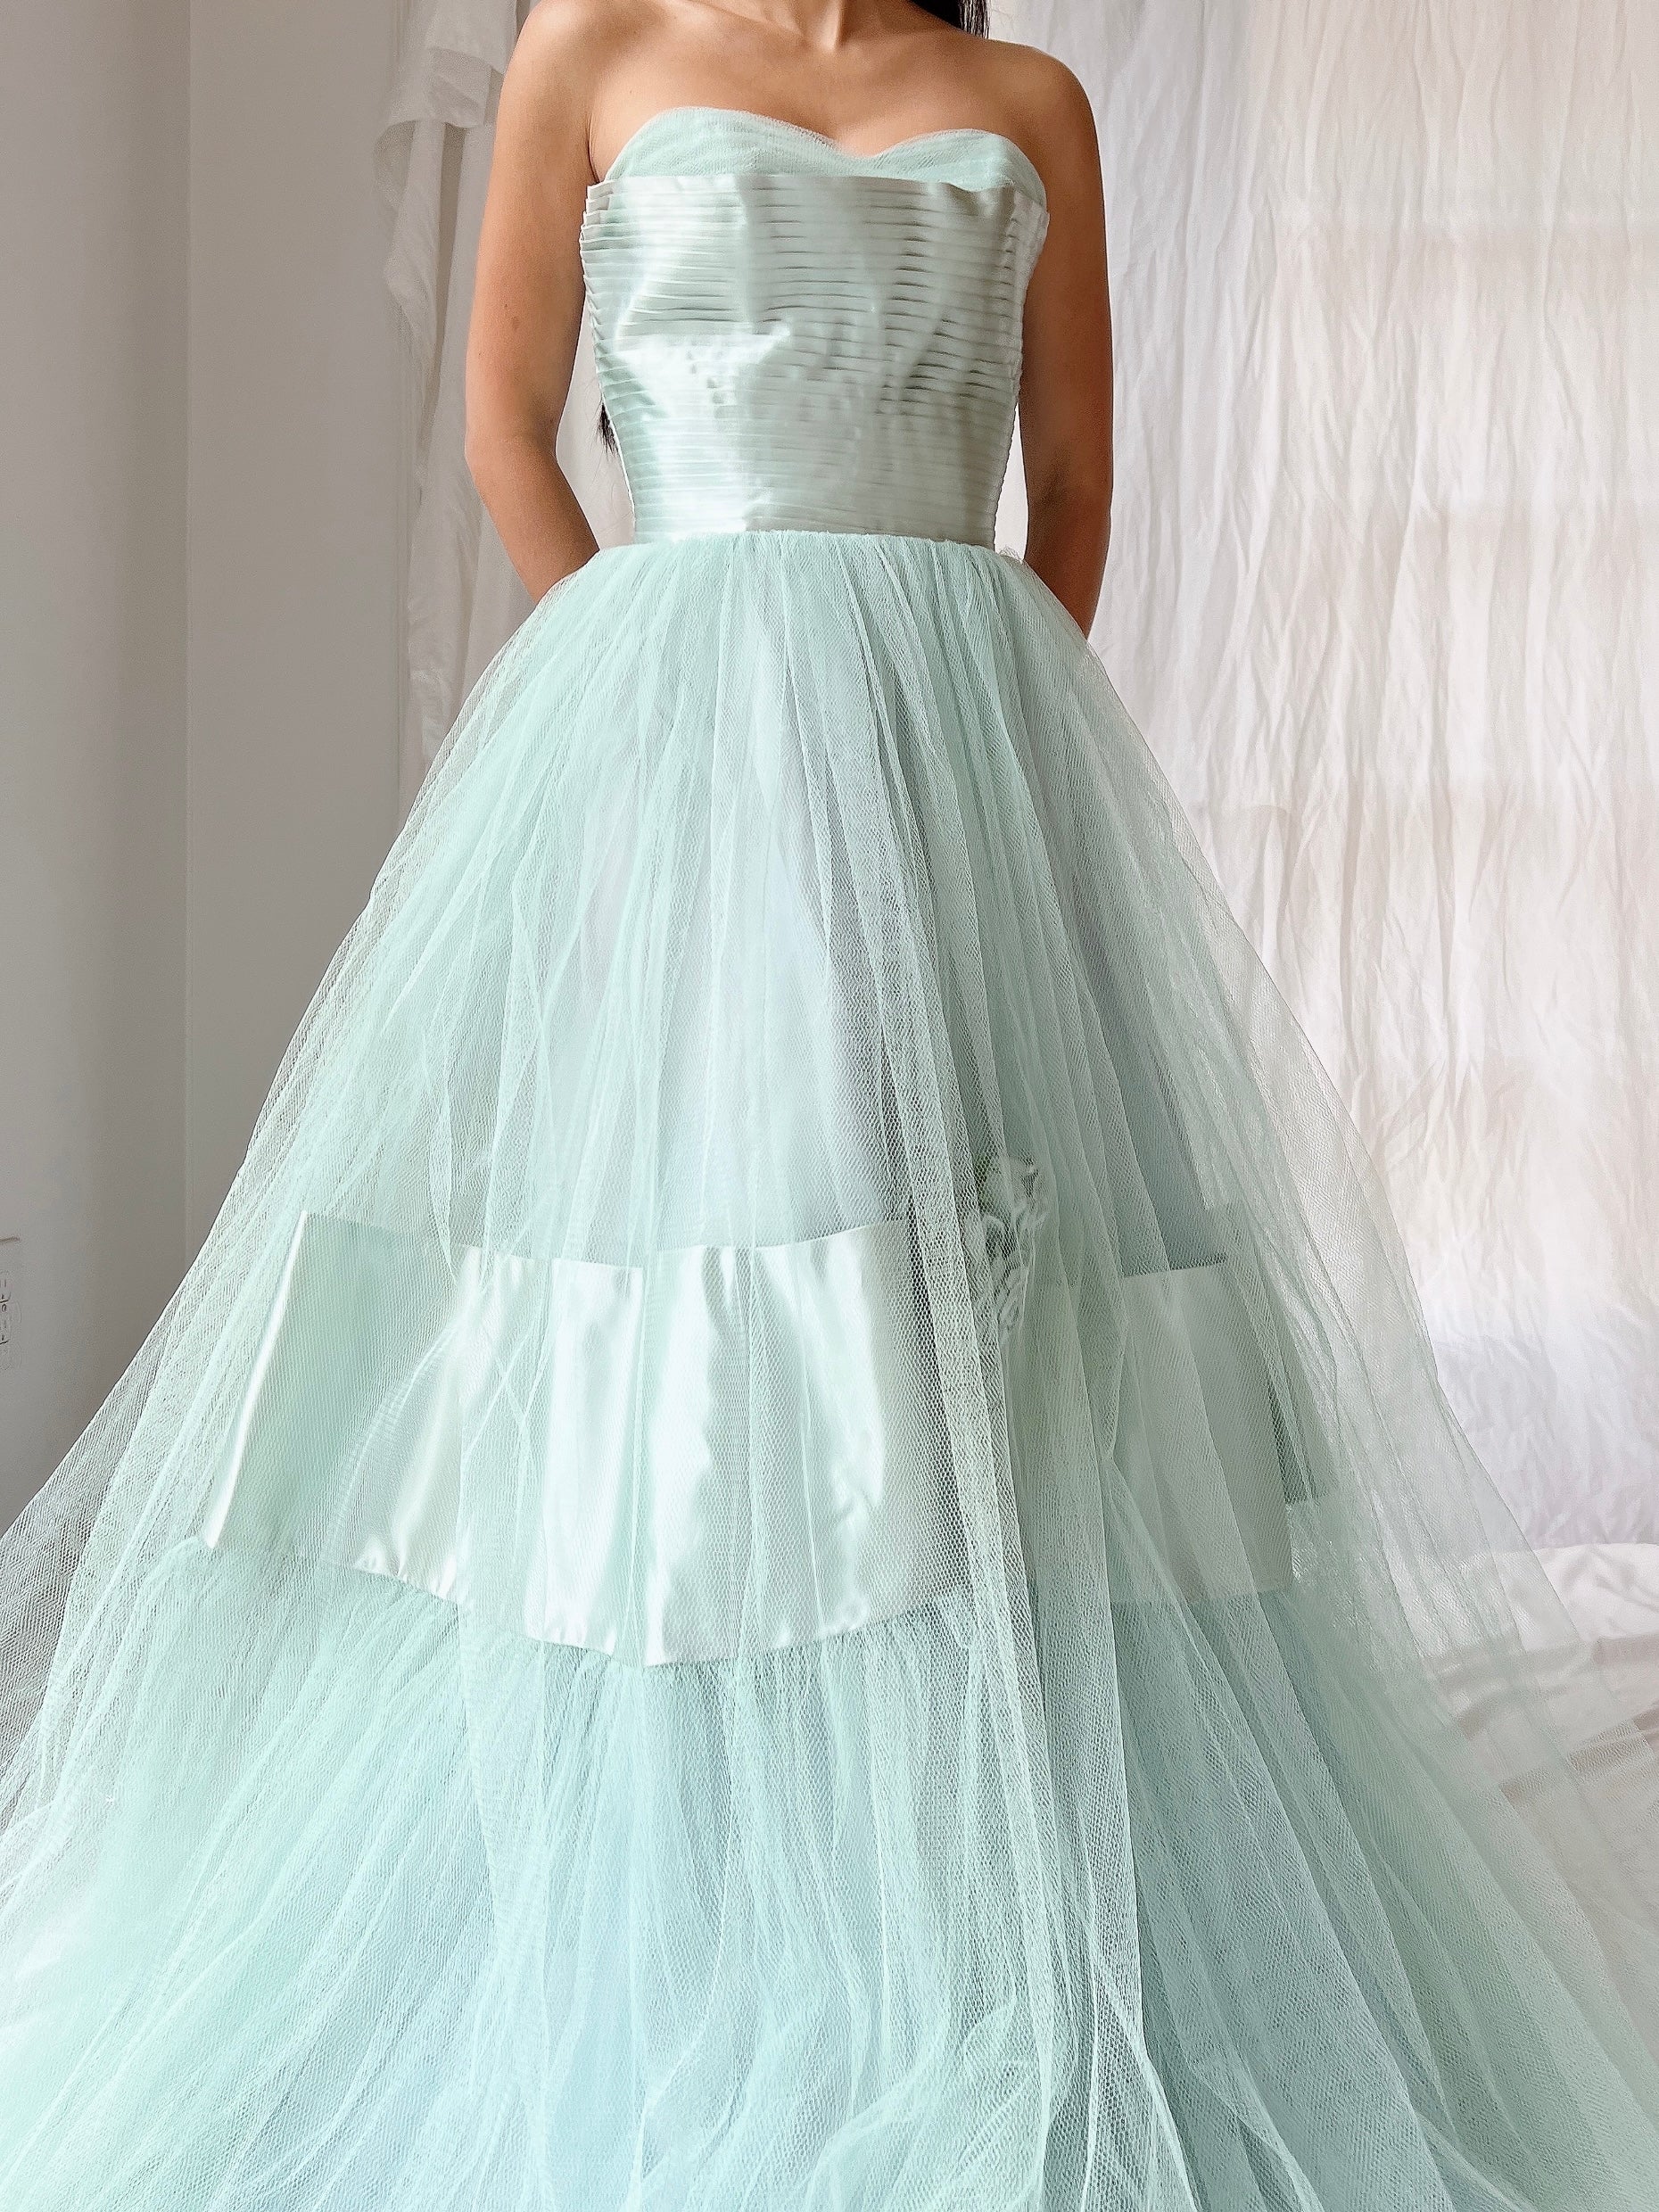 1950s Seafoam Tulle Gown - XS